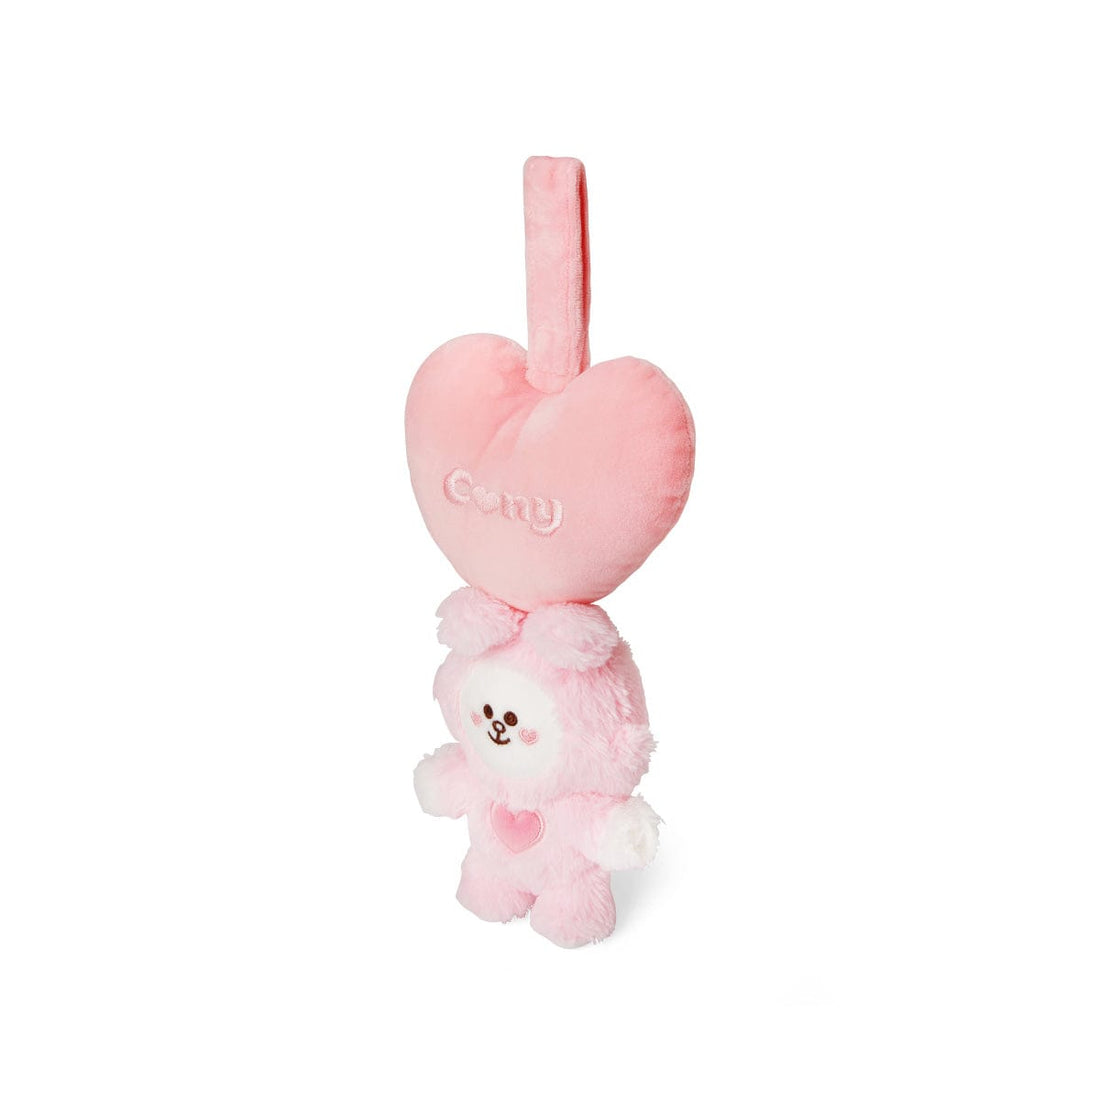 LF LIVING CONY LINE FRIENDS CONY INFANT MUSICAL MOBILE